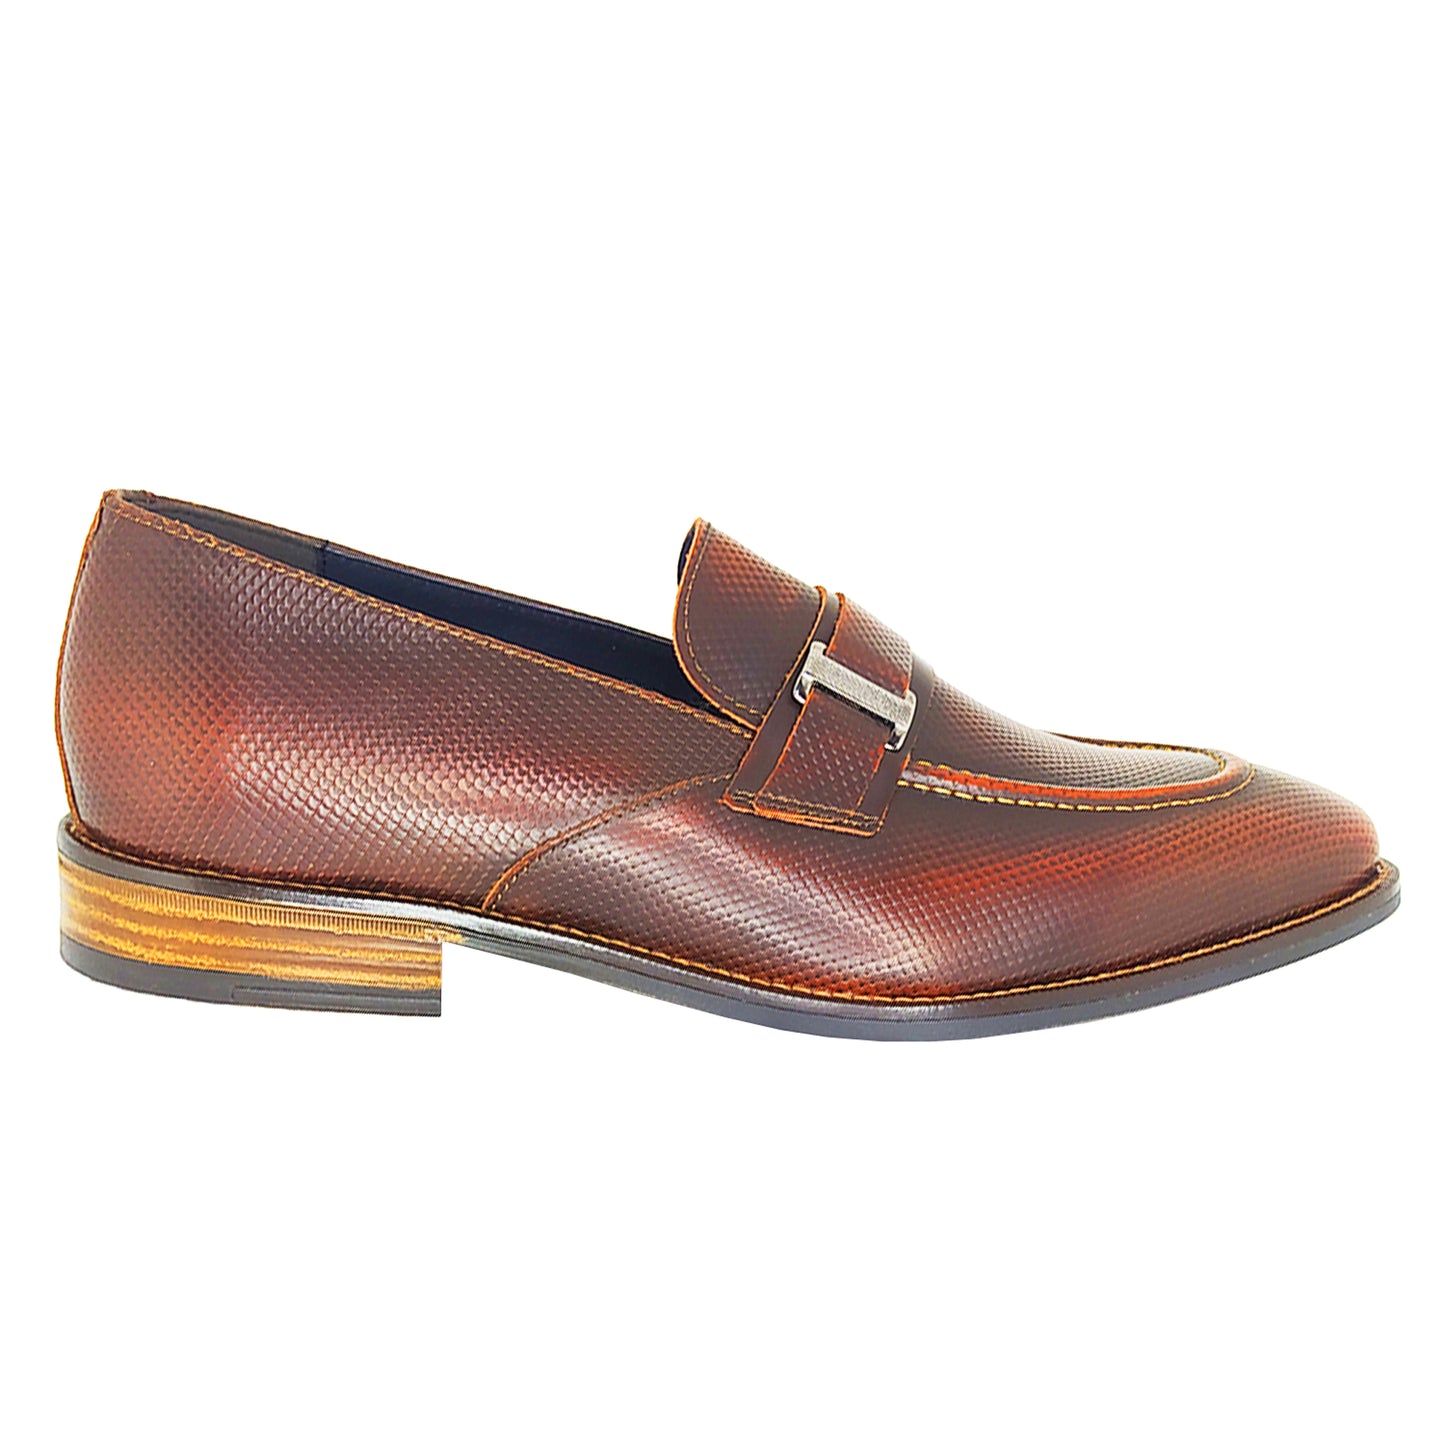 Handmade Brown Leather Loafers Shoes 727 BROWN